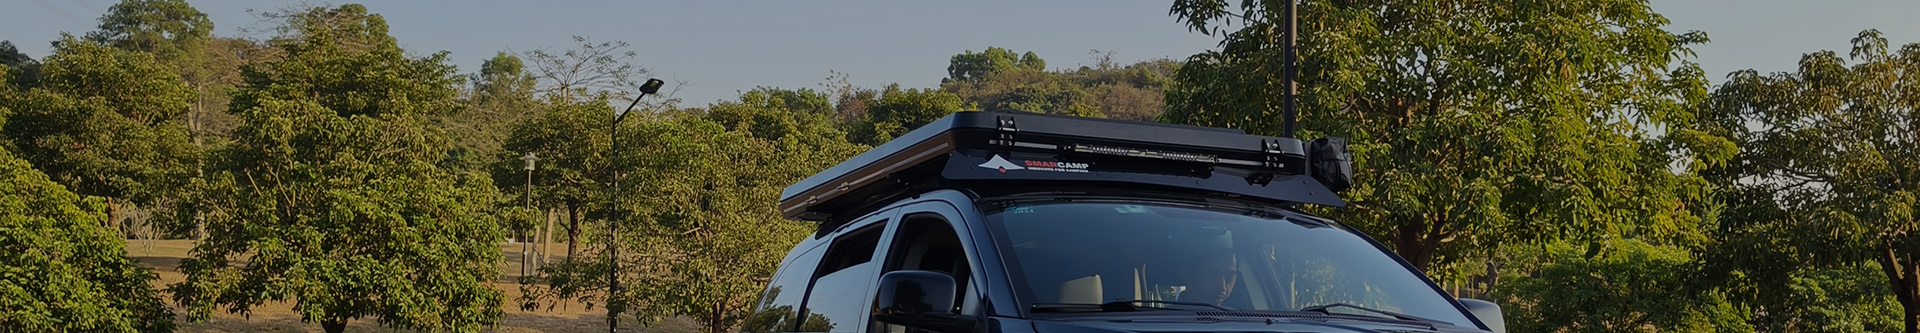 Waterproof SUV 4X4 Soft Shell Rooftop Tent